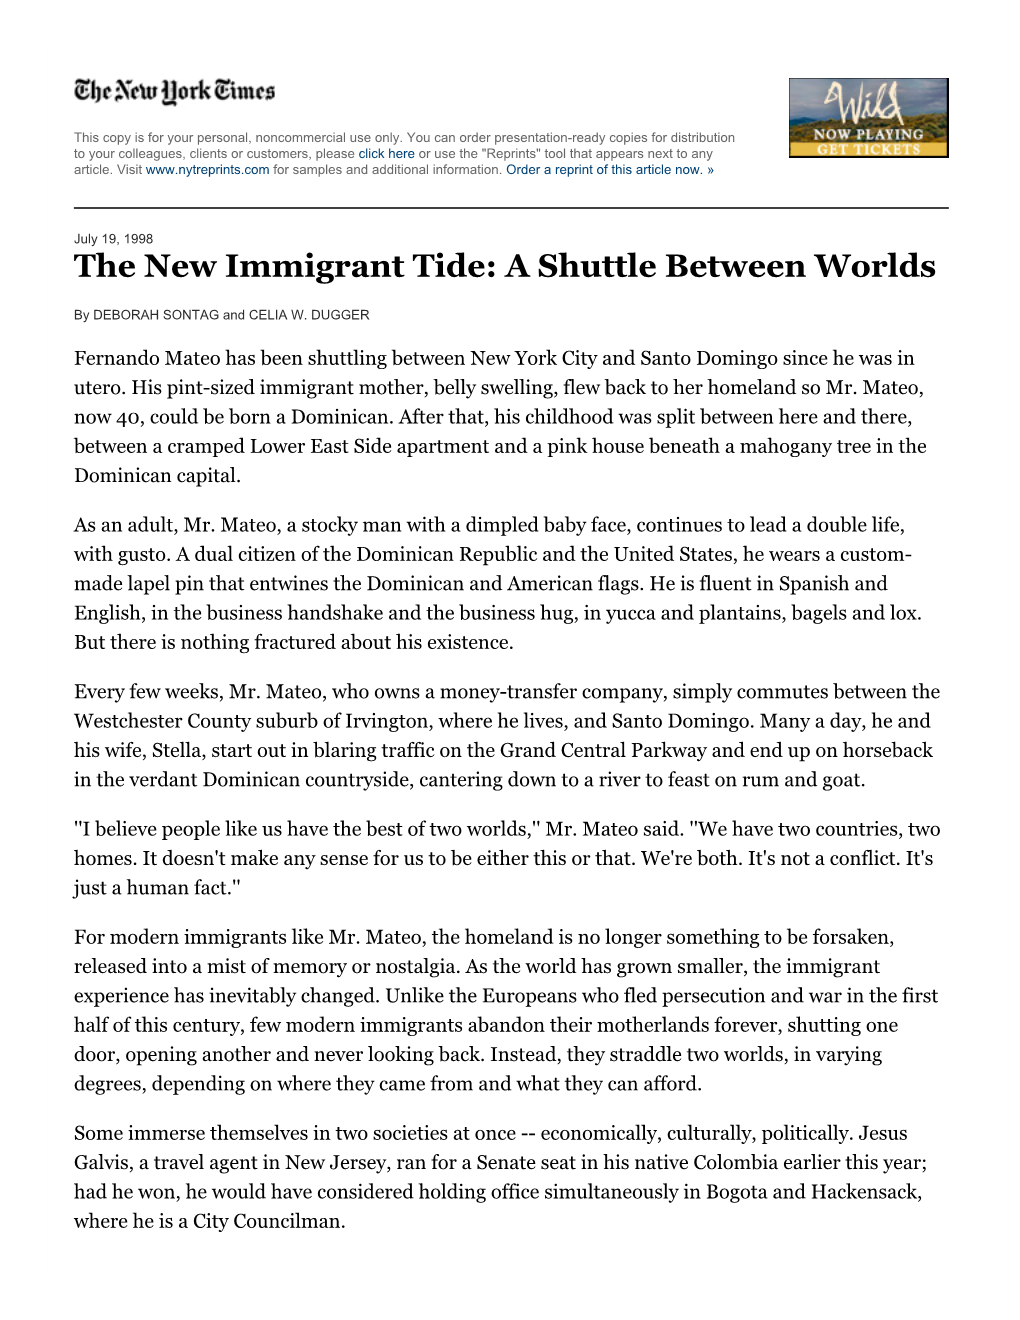 The New Immigrant Tide: a Shuttle Between Worlds